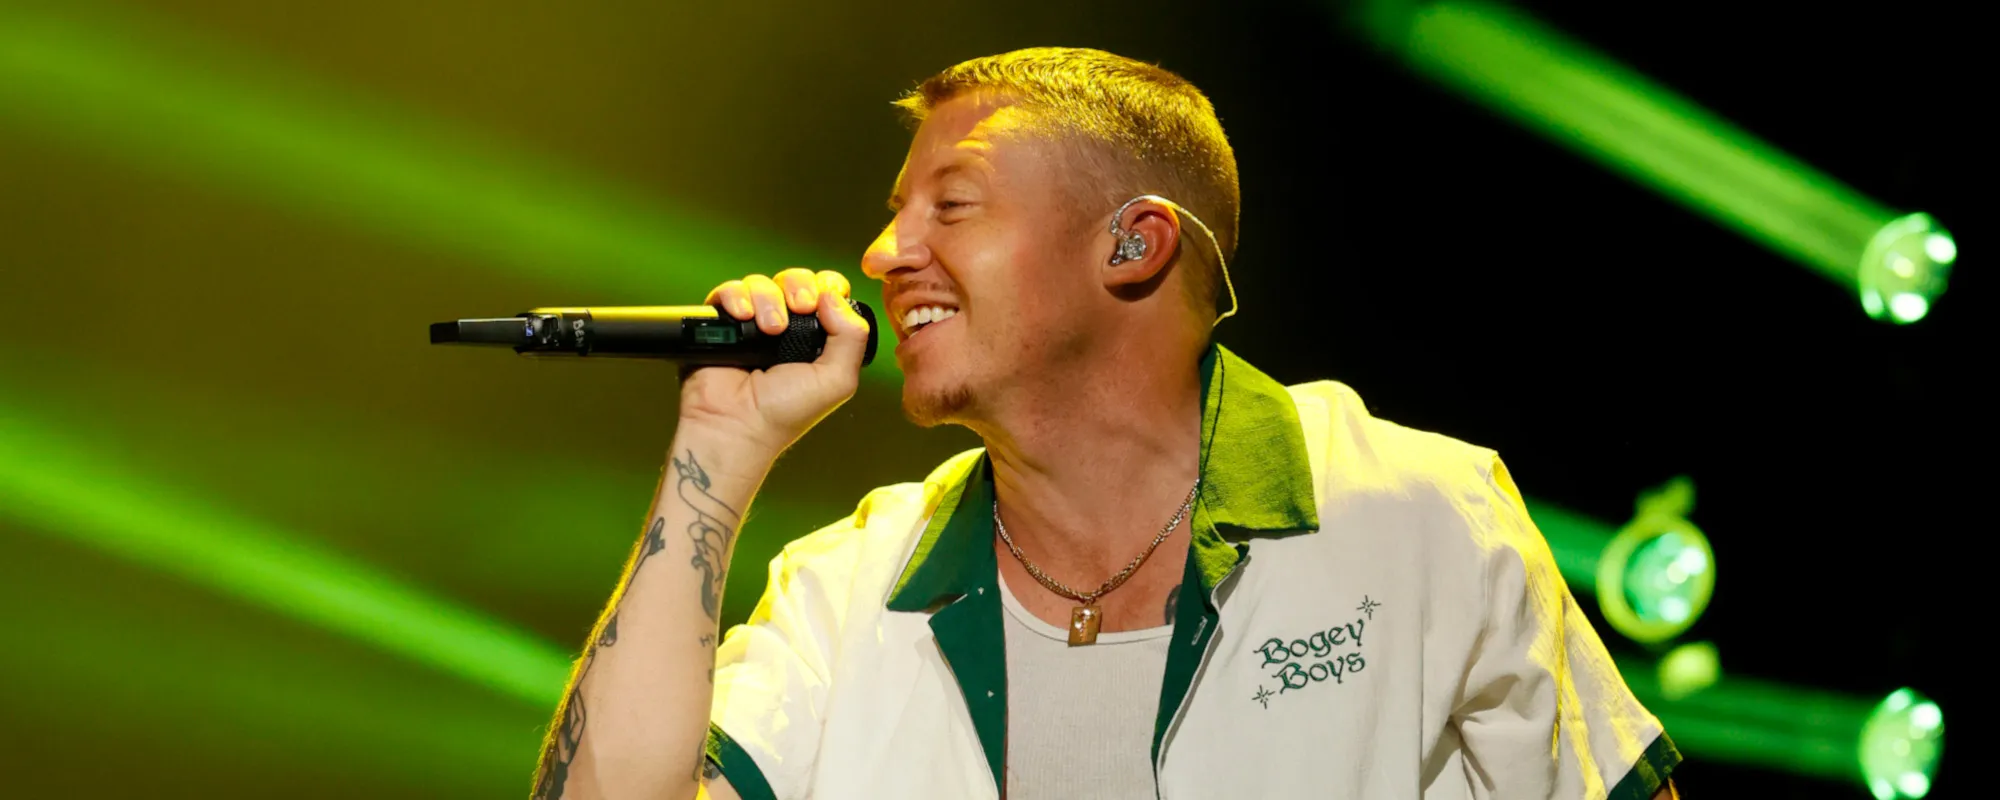 Macklemore Shares Live Video For “Next Year” Shot in Downtown Seattle